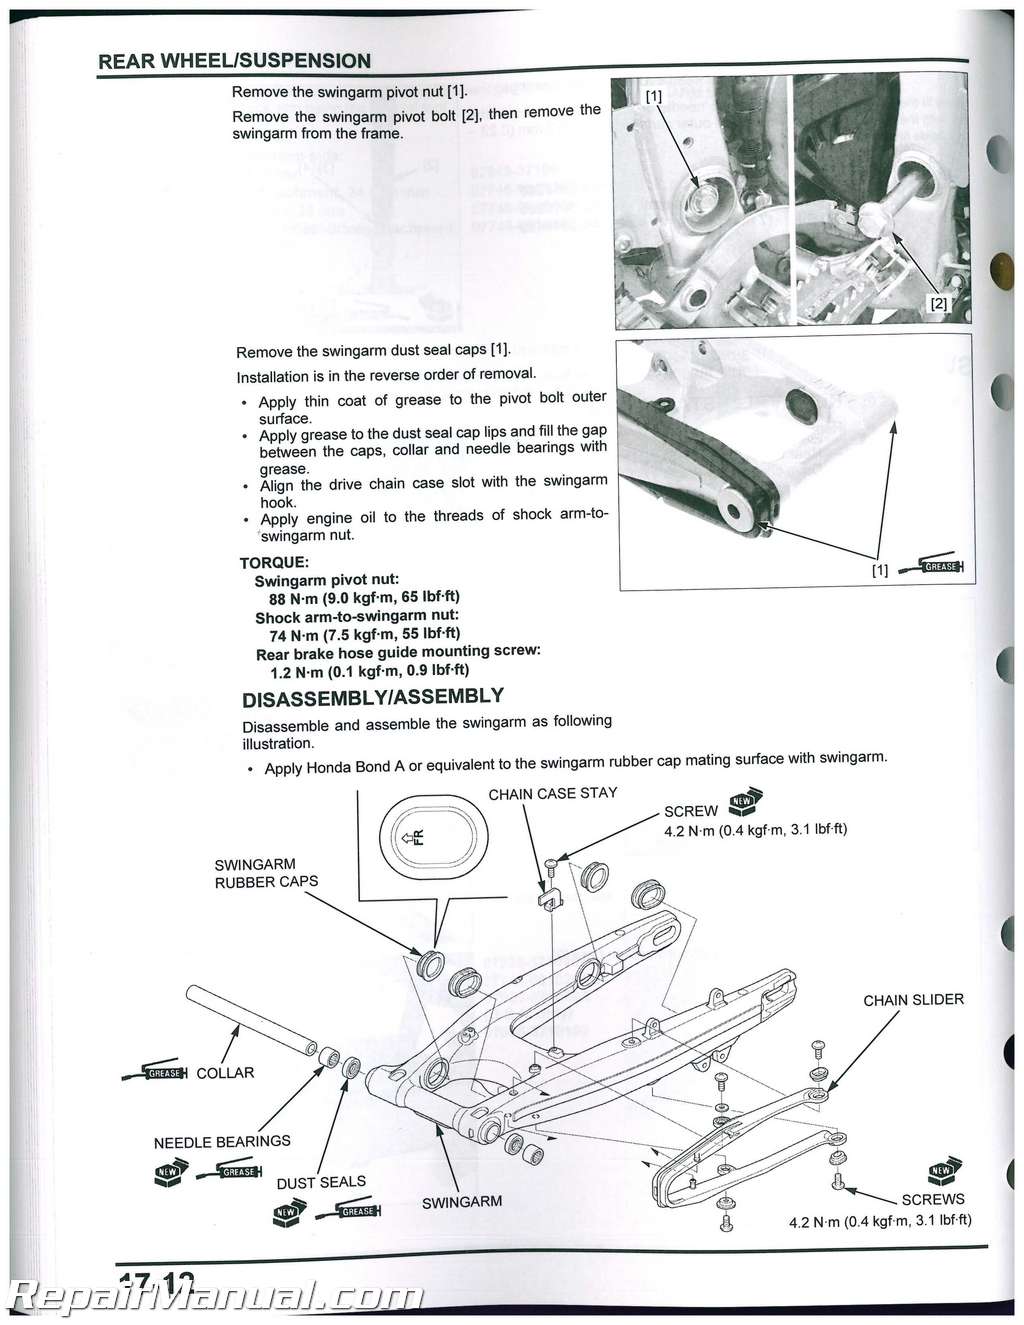 Motorcycle service manual free download